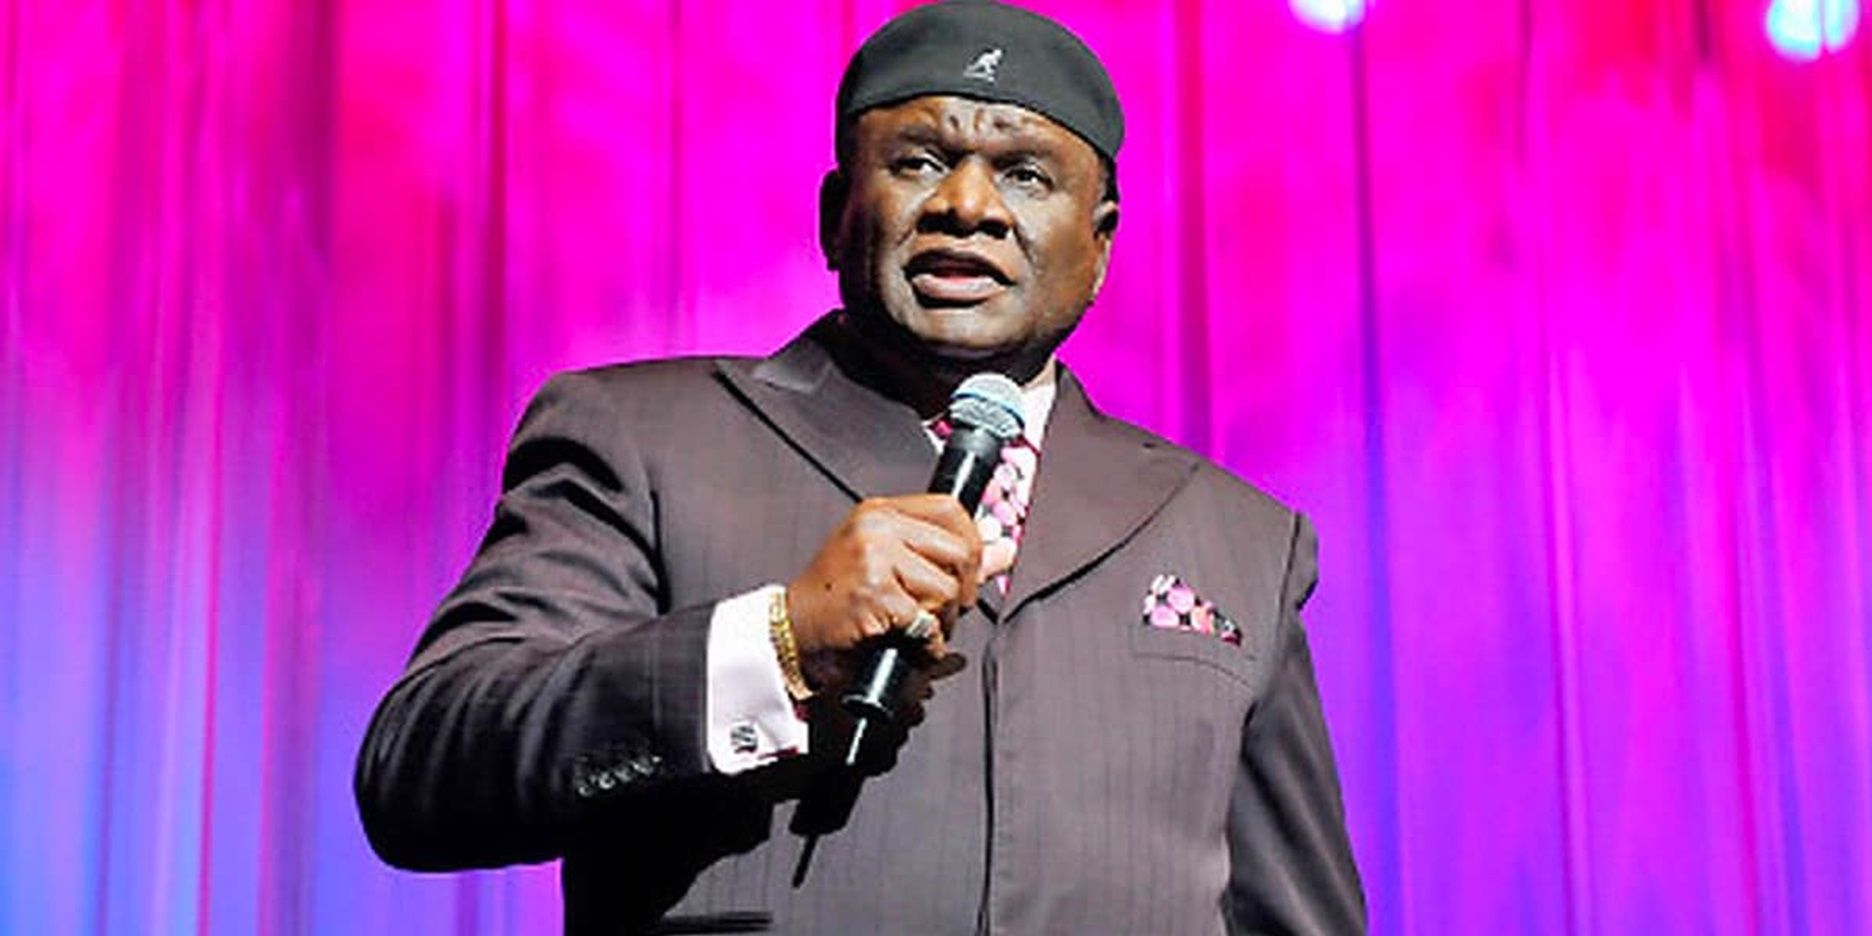 George Wallace performing on stage